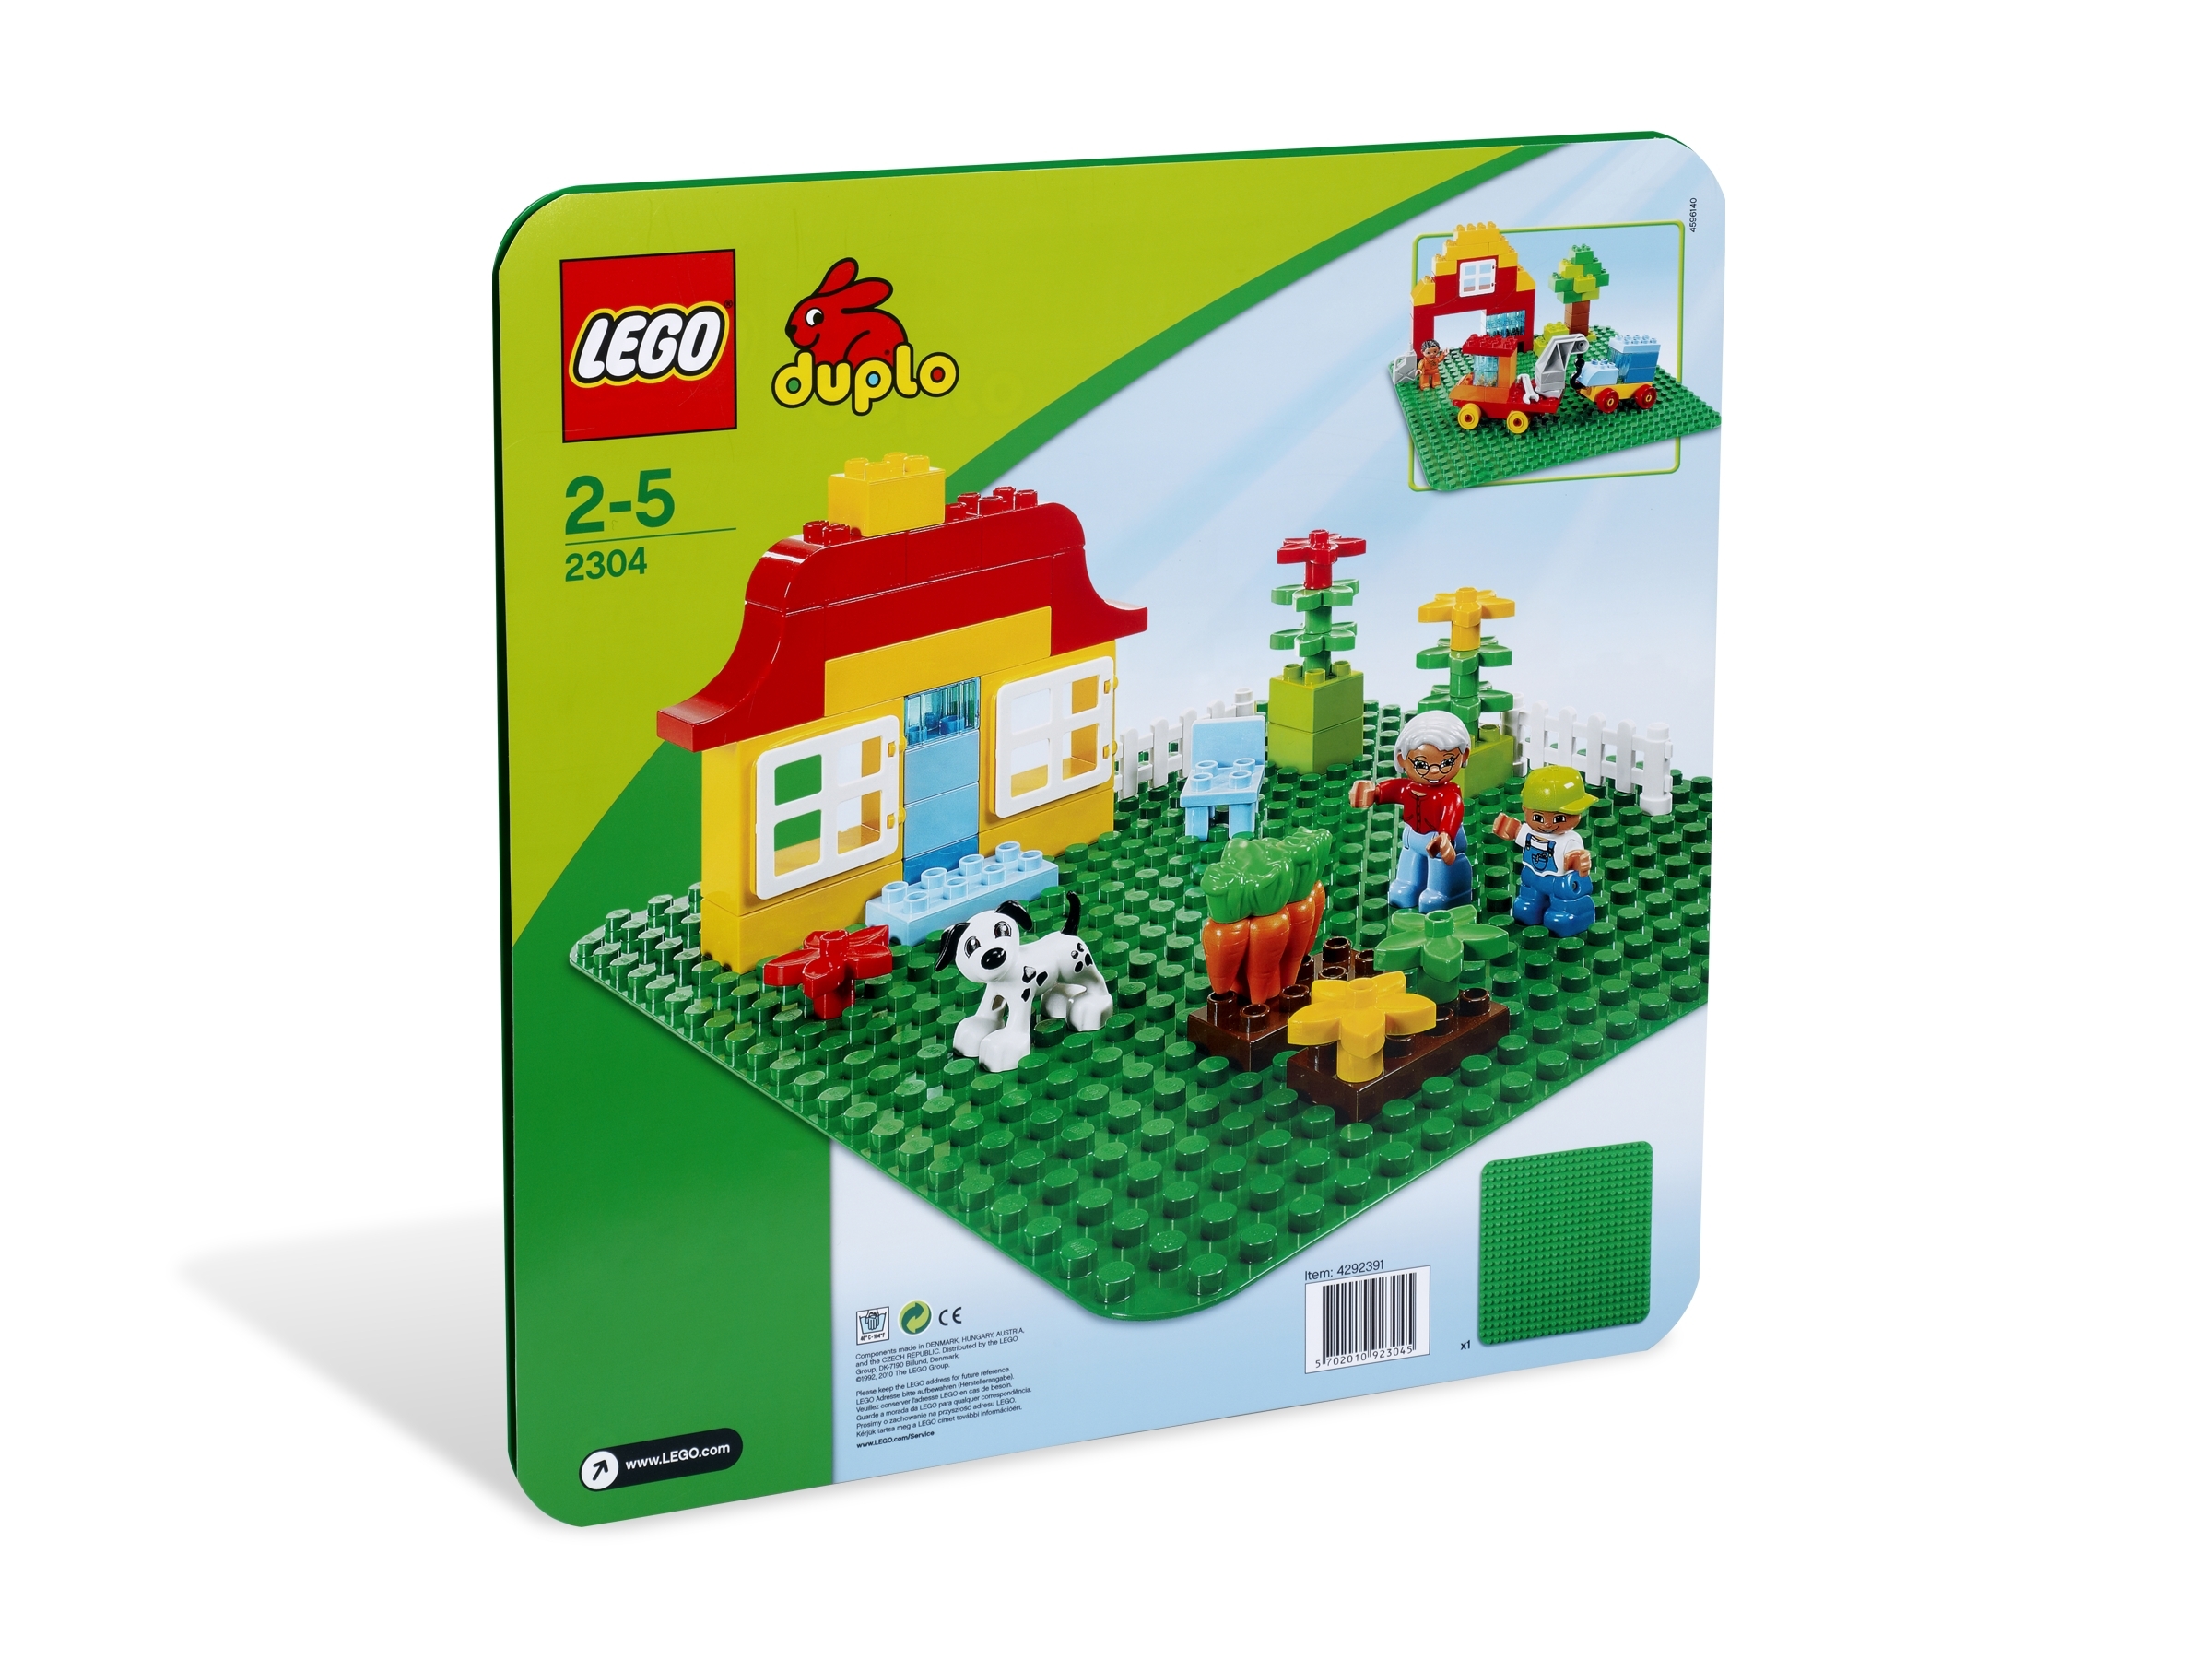 lego duplo large green building plate 2304